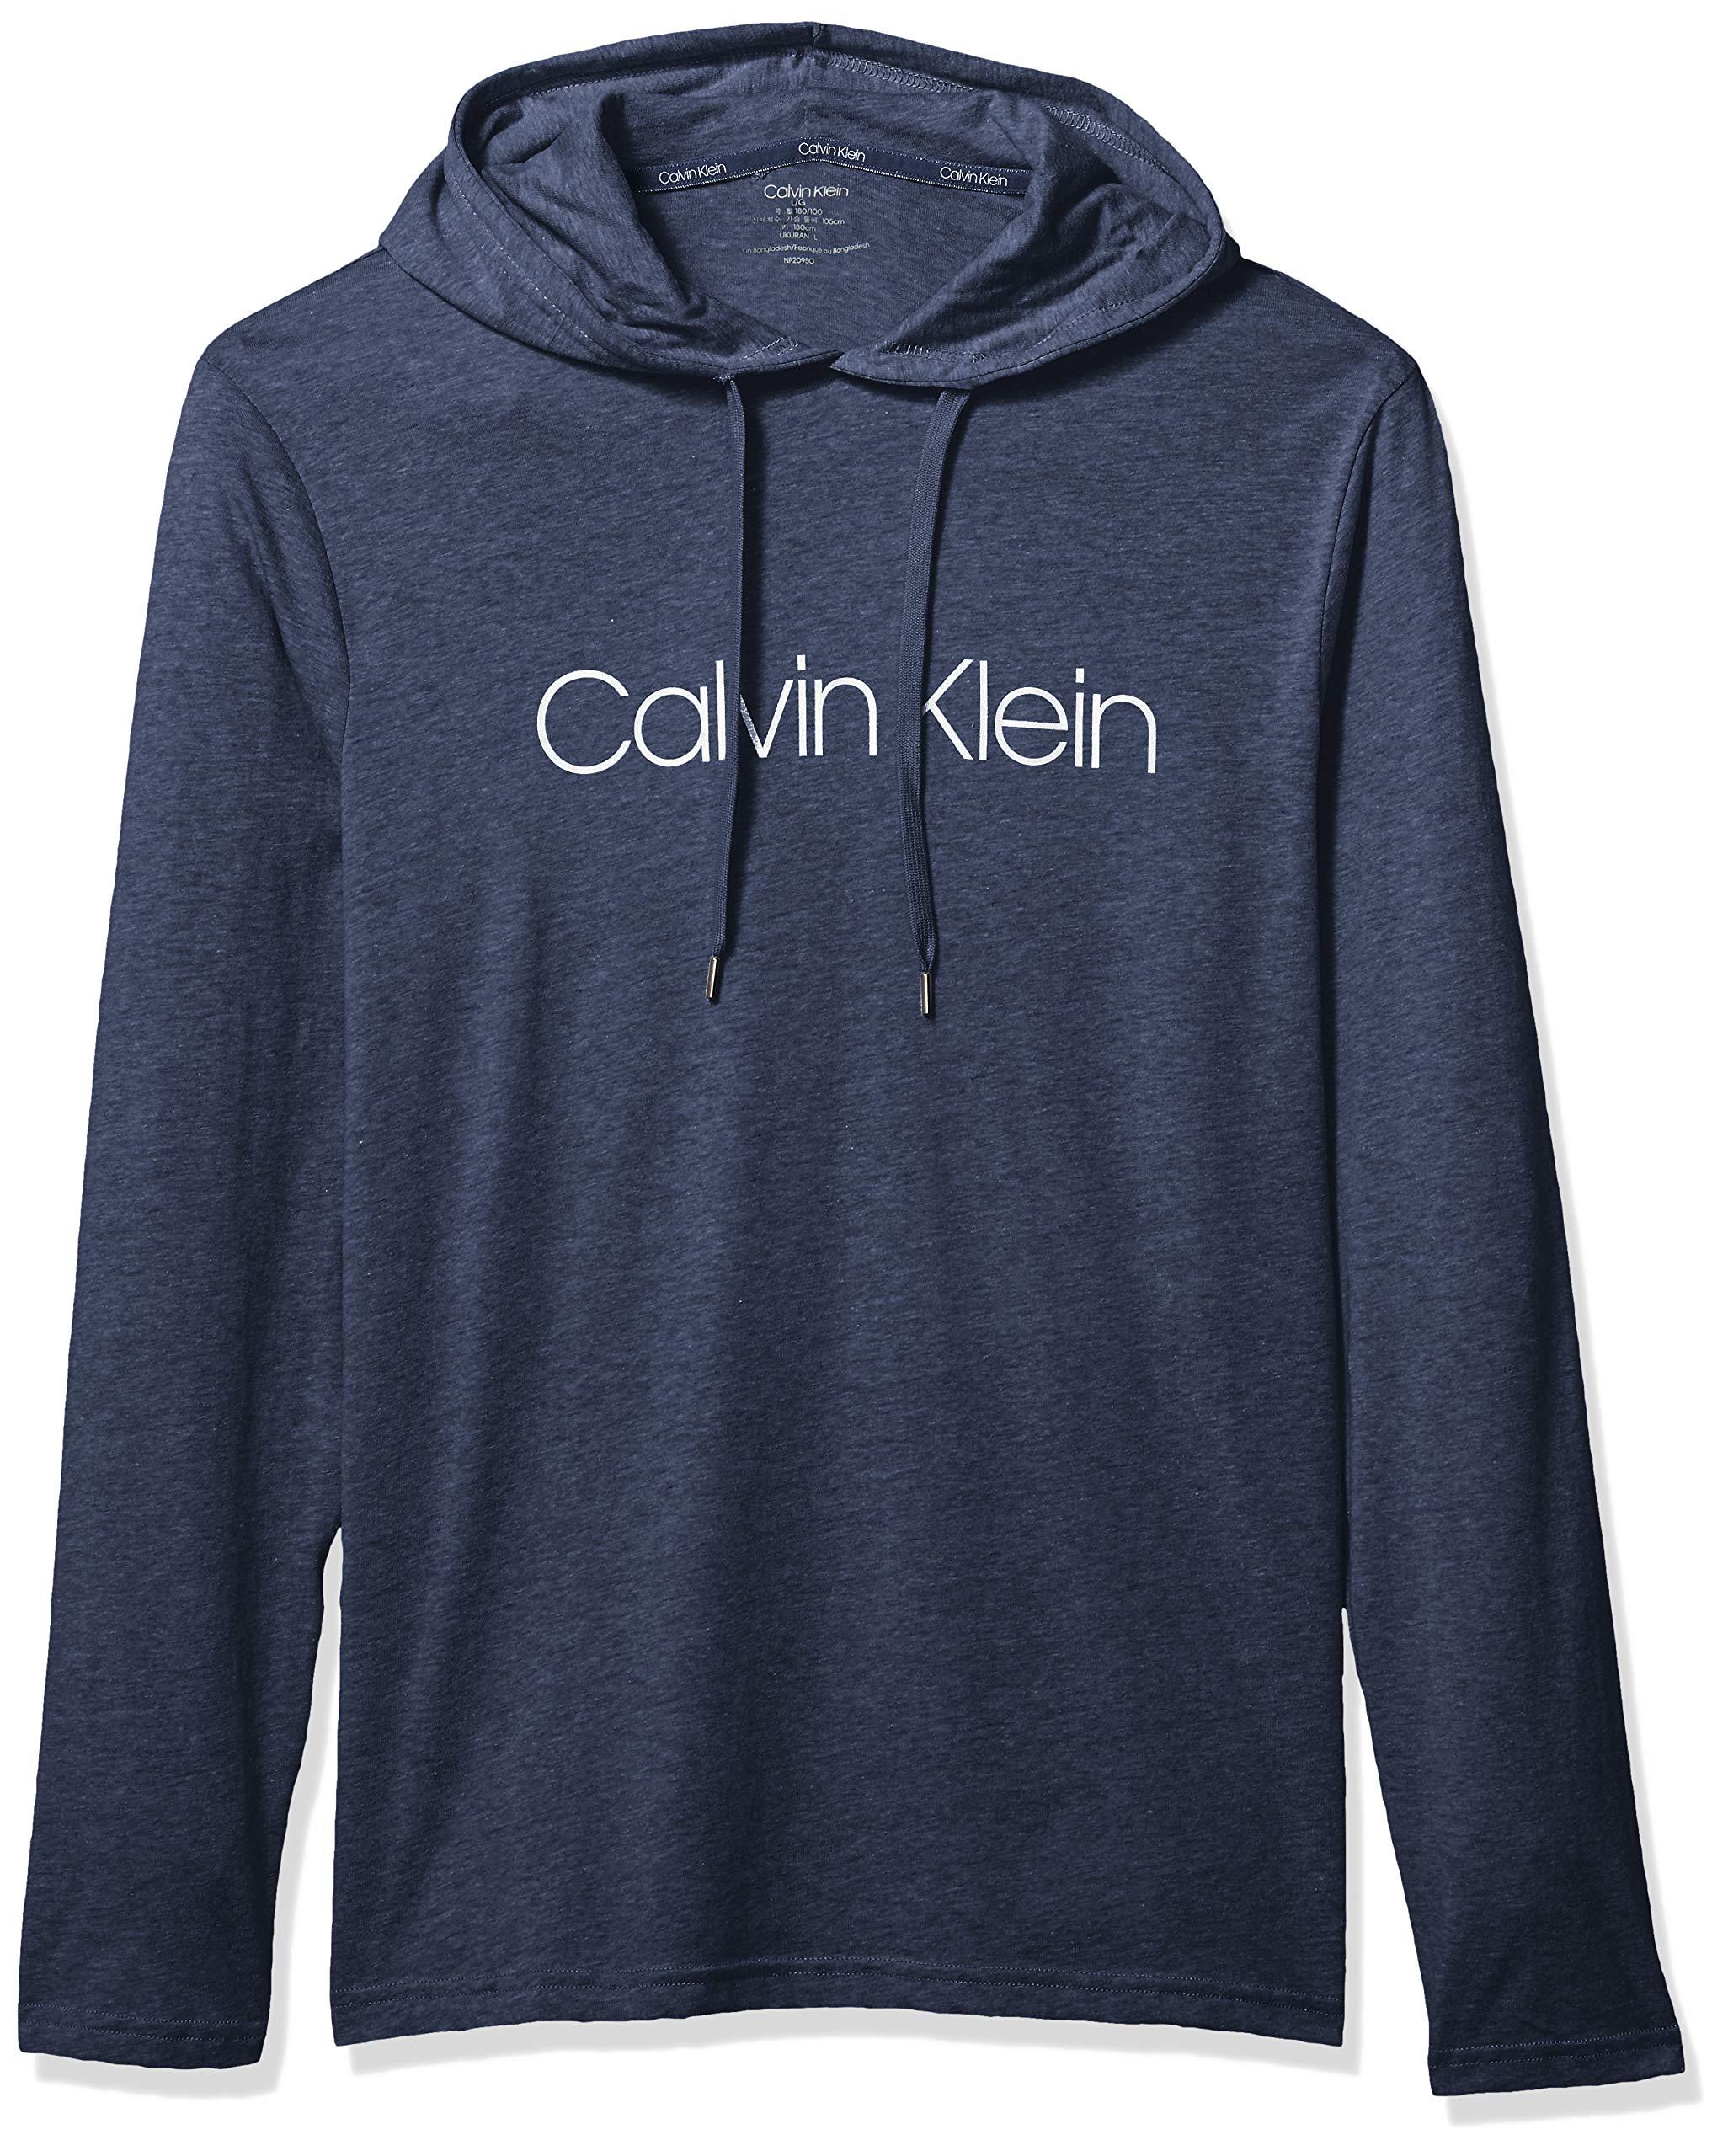 Calvin Klein Cotton Ck Chill Lounge Pullover Hoodie in Blue for Men - Lyst